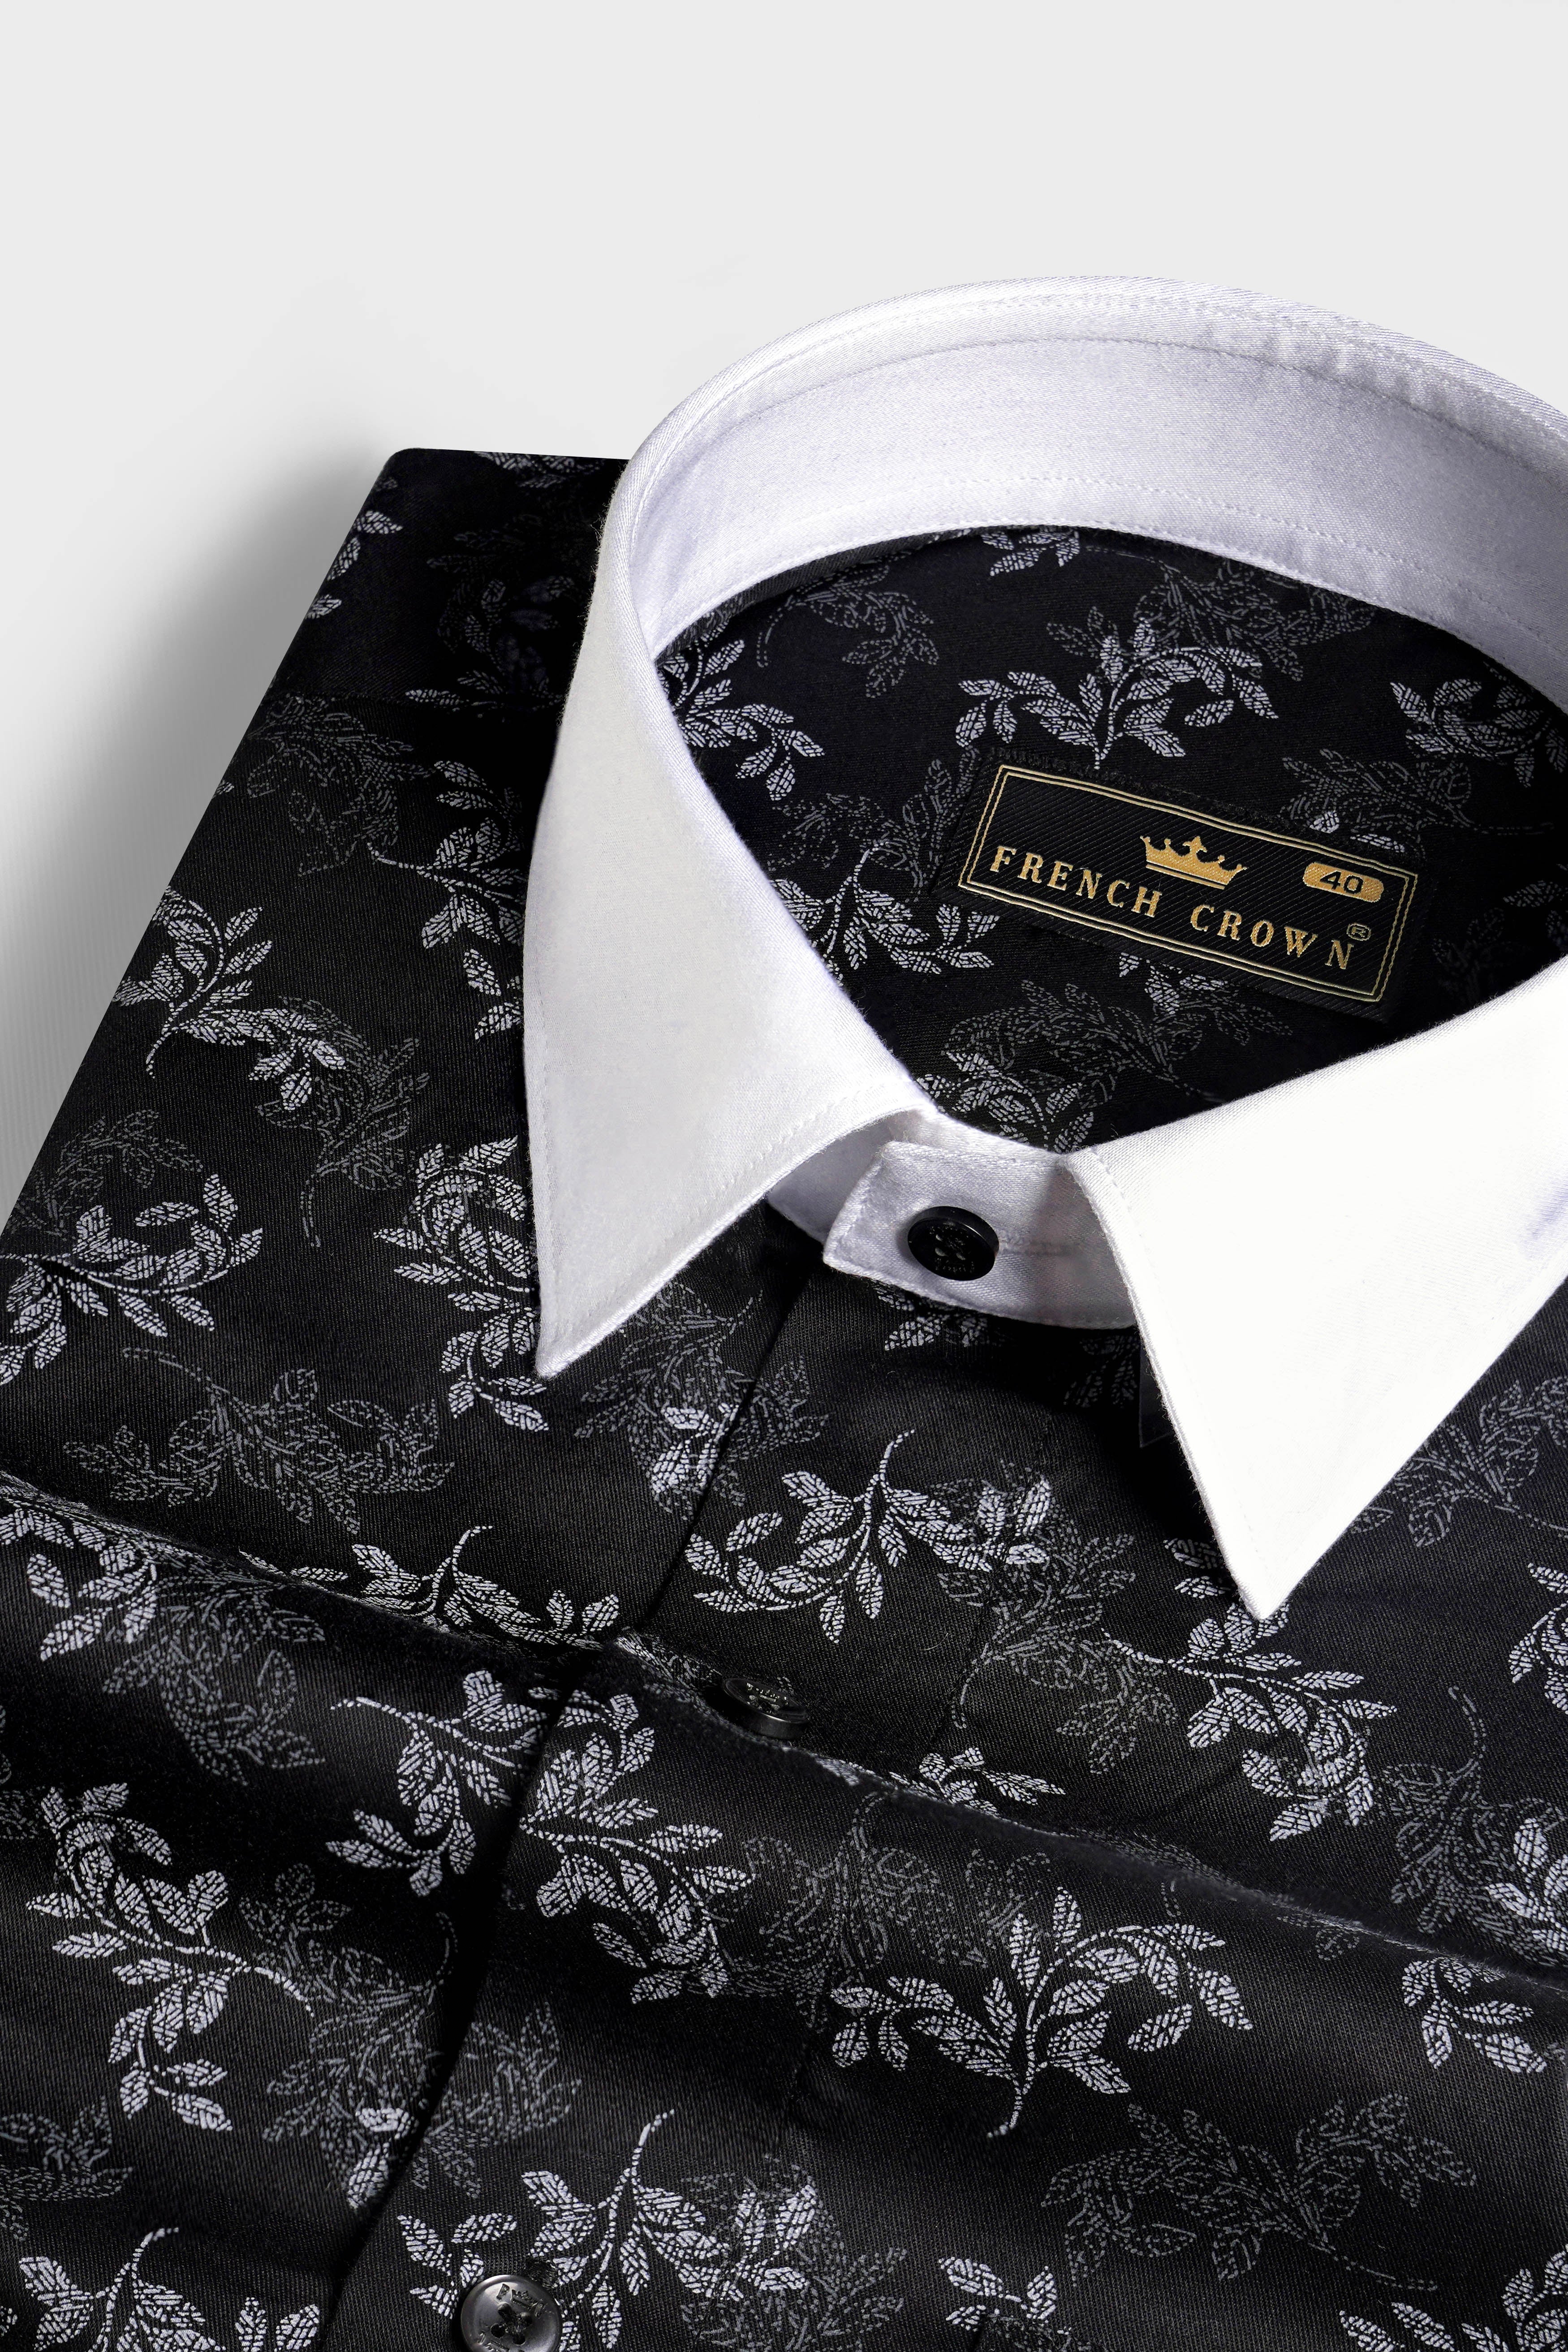 Jade Black with White Cuffs and Collar Leaves Printed Super Soft Premium Cotton Shirt